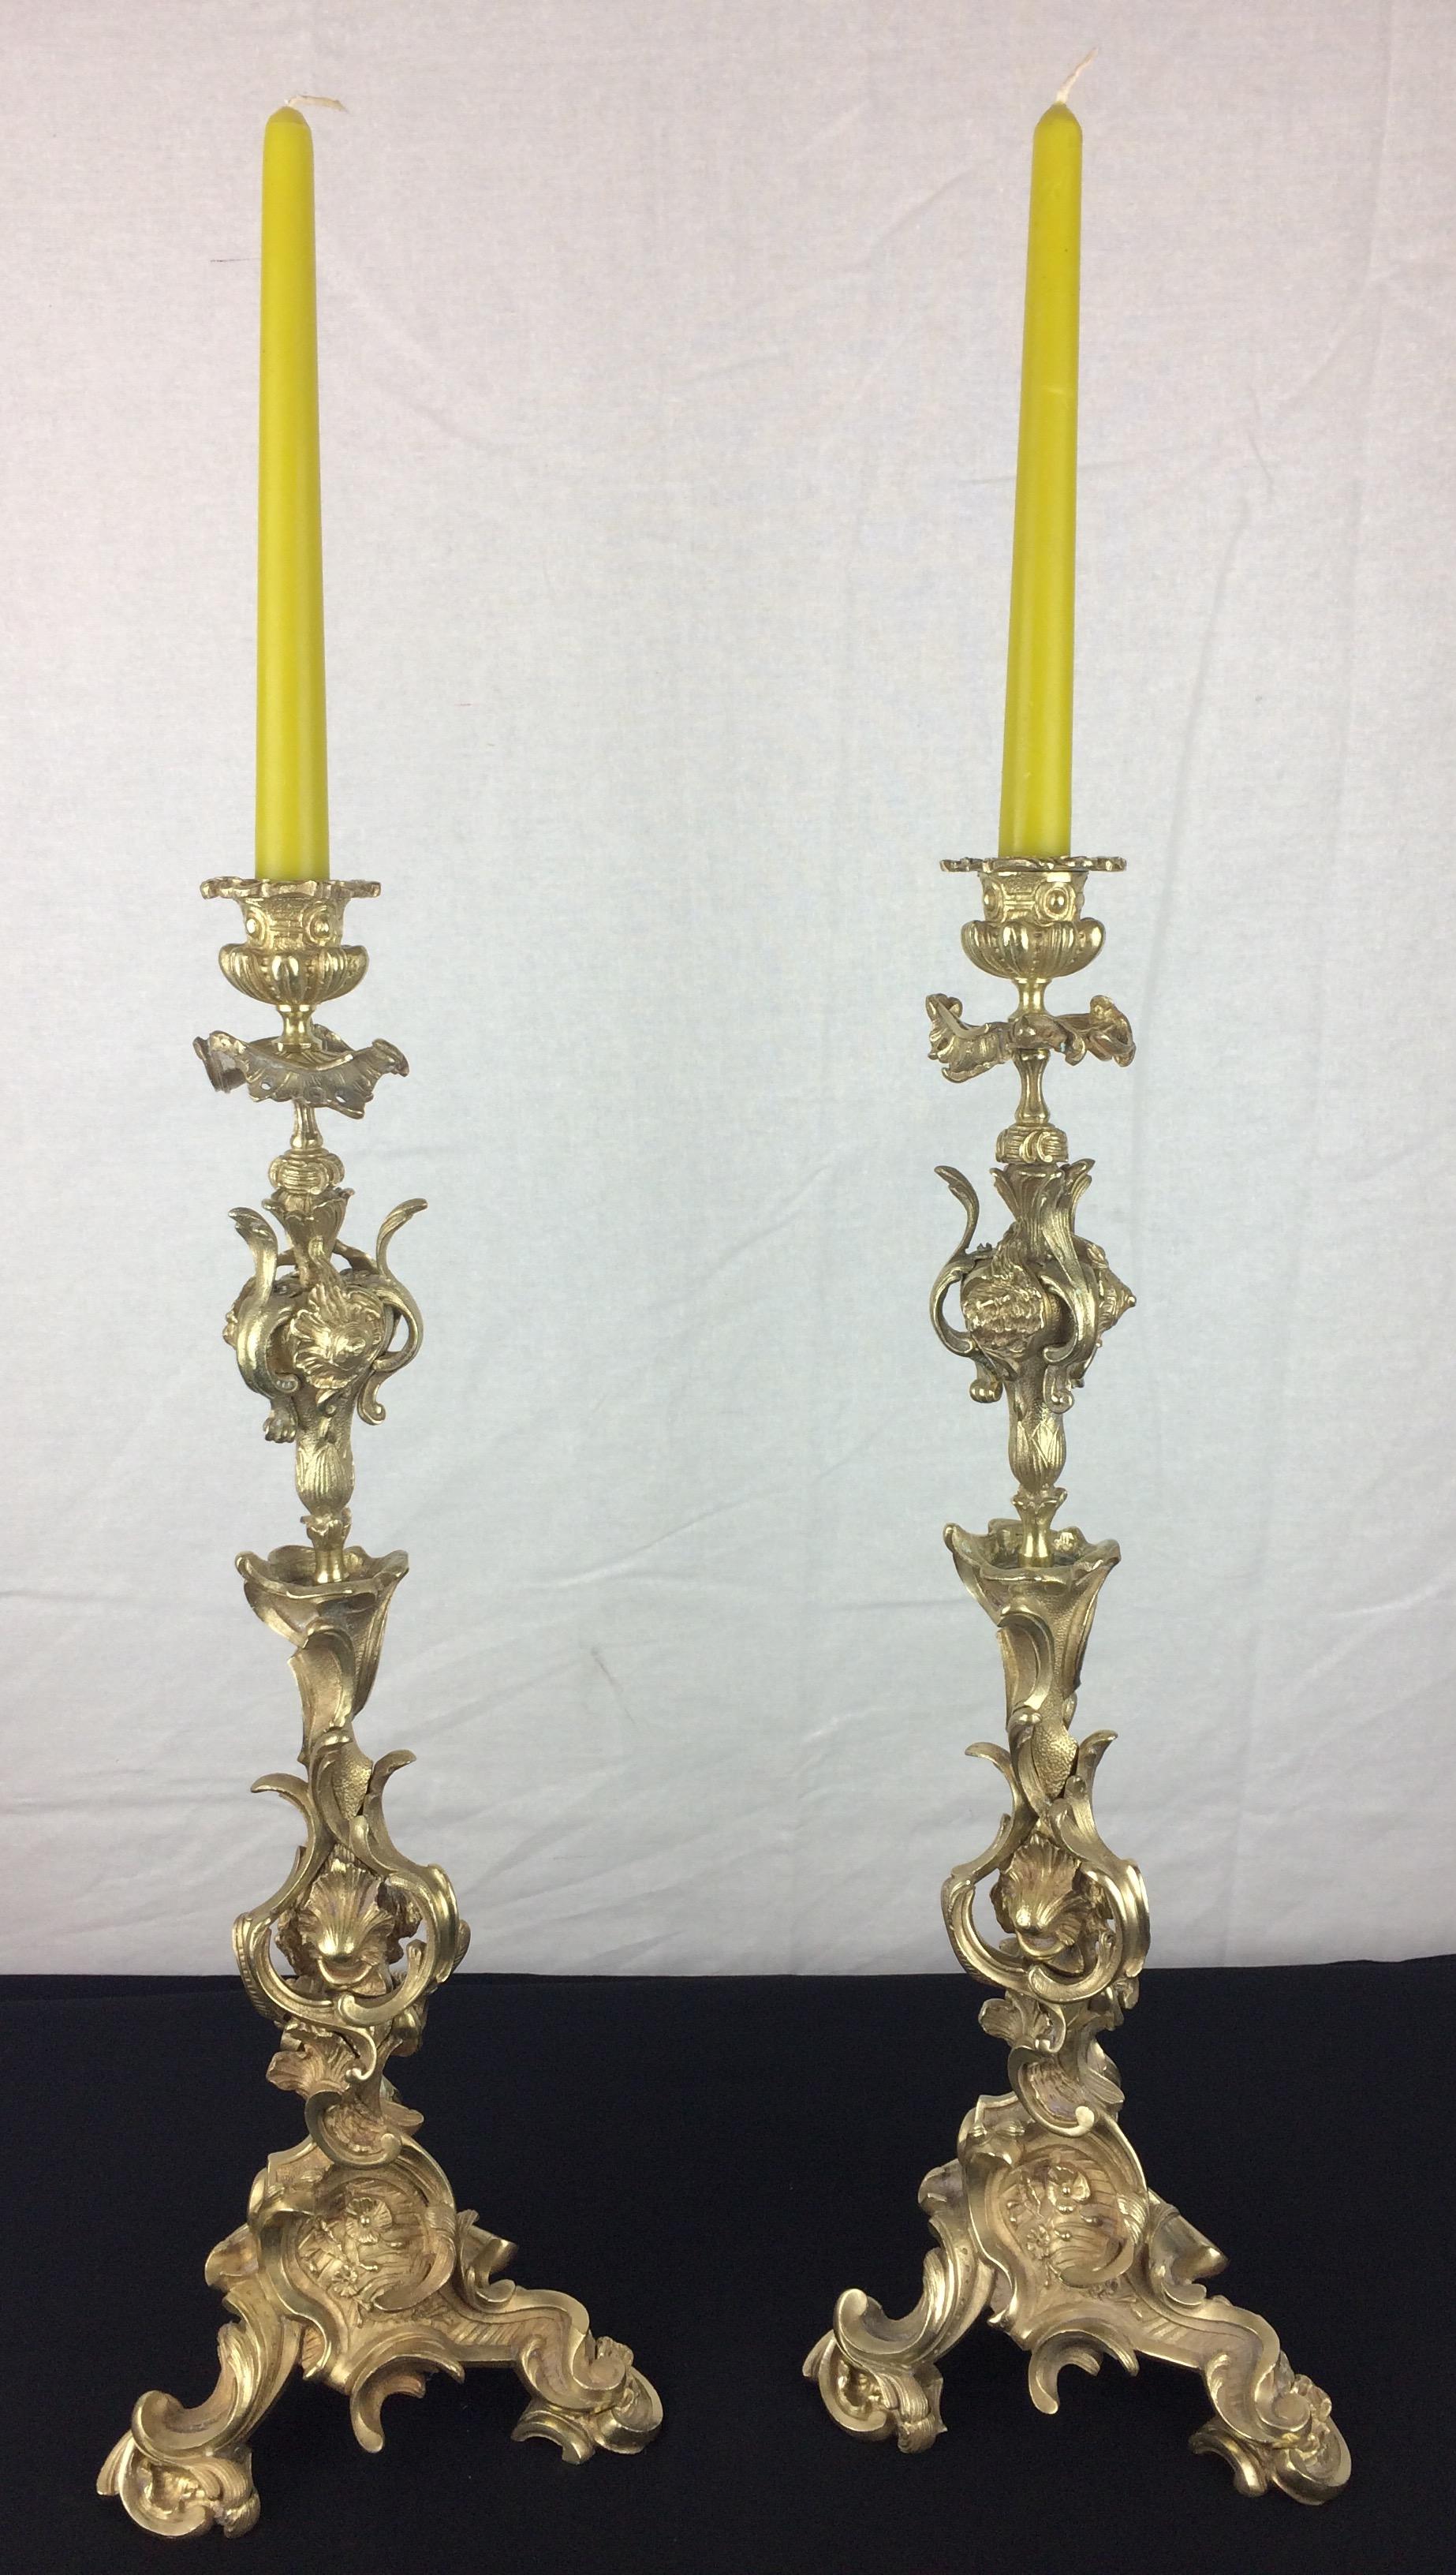 A very fine pair of 19th century French Napoleon III gilt bronze candelabras, each with scrolled arms, crowned with a bronze candle snuffer in the shape of a burning flame. 

Each bears the signature or makers mark, Raulin.
  